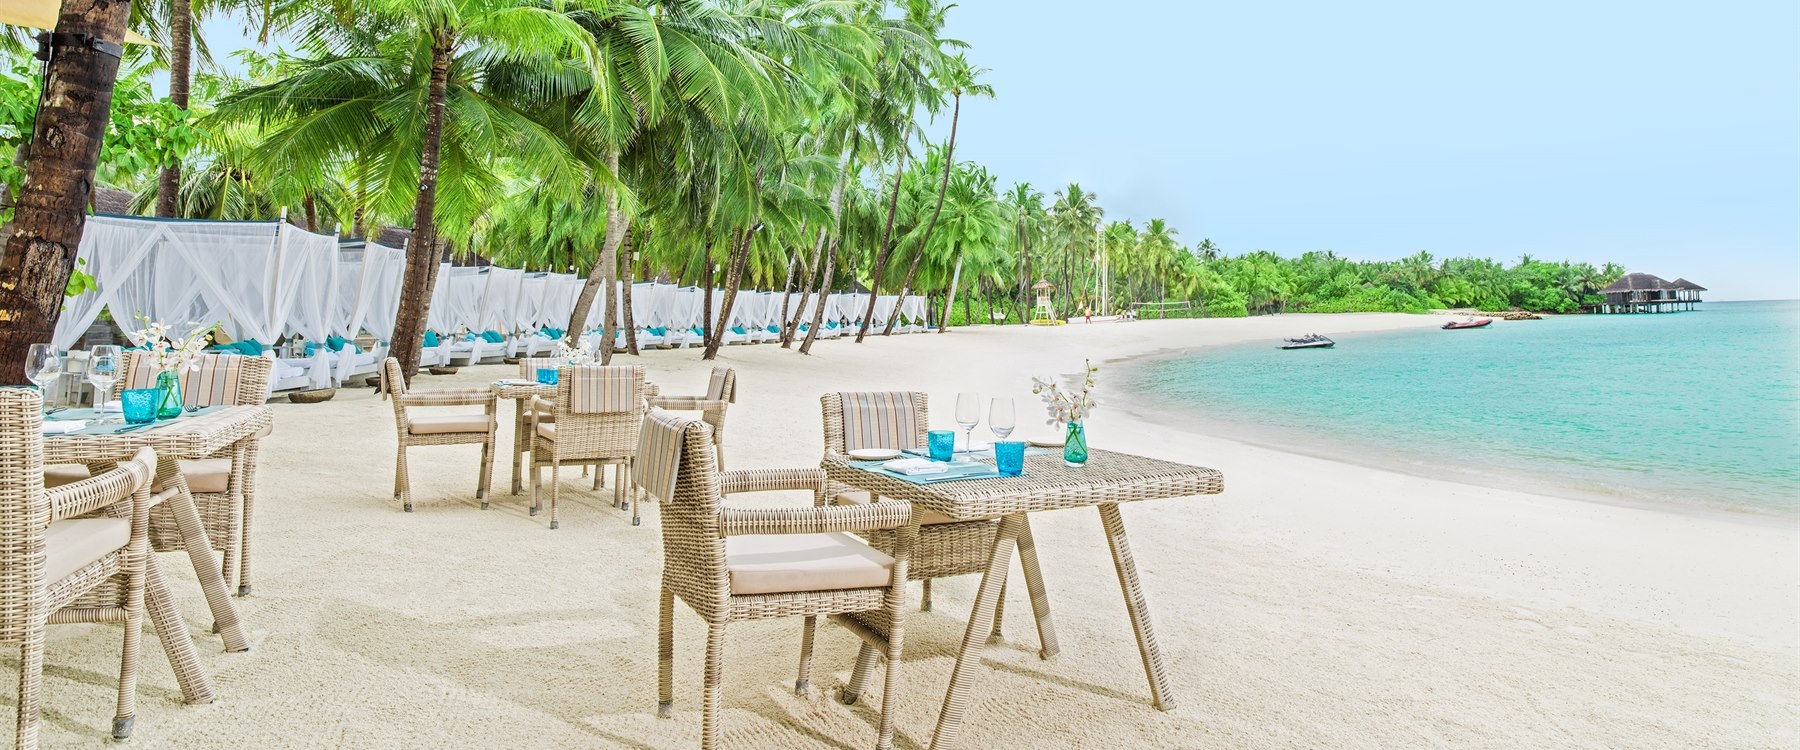 Dining area at the beach club at One&Only Reethi Rah, Maldives